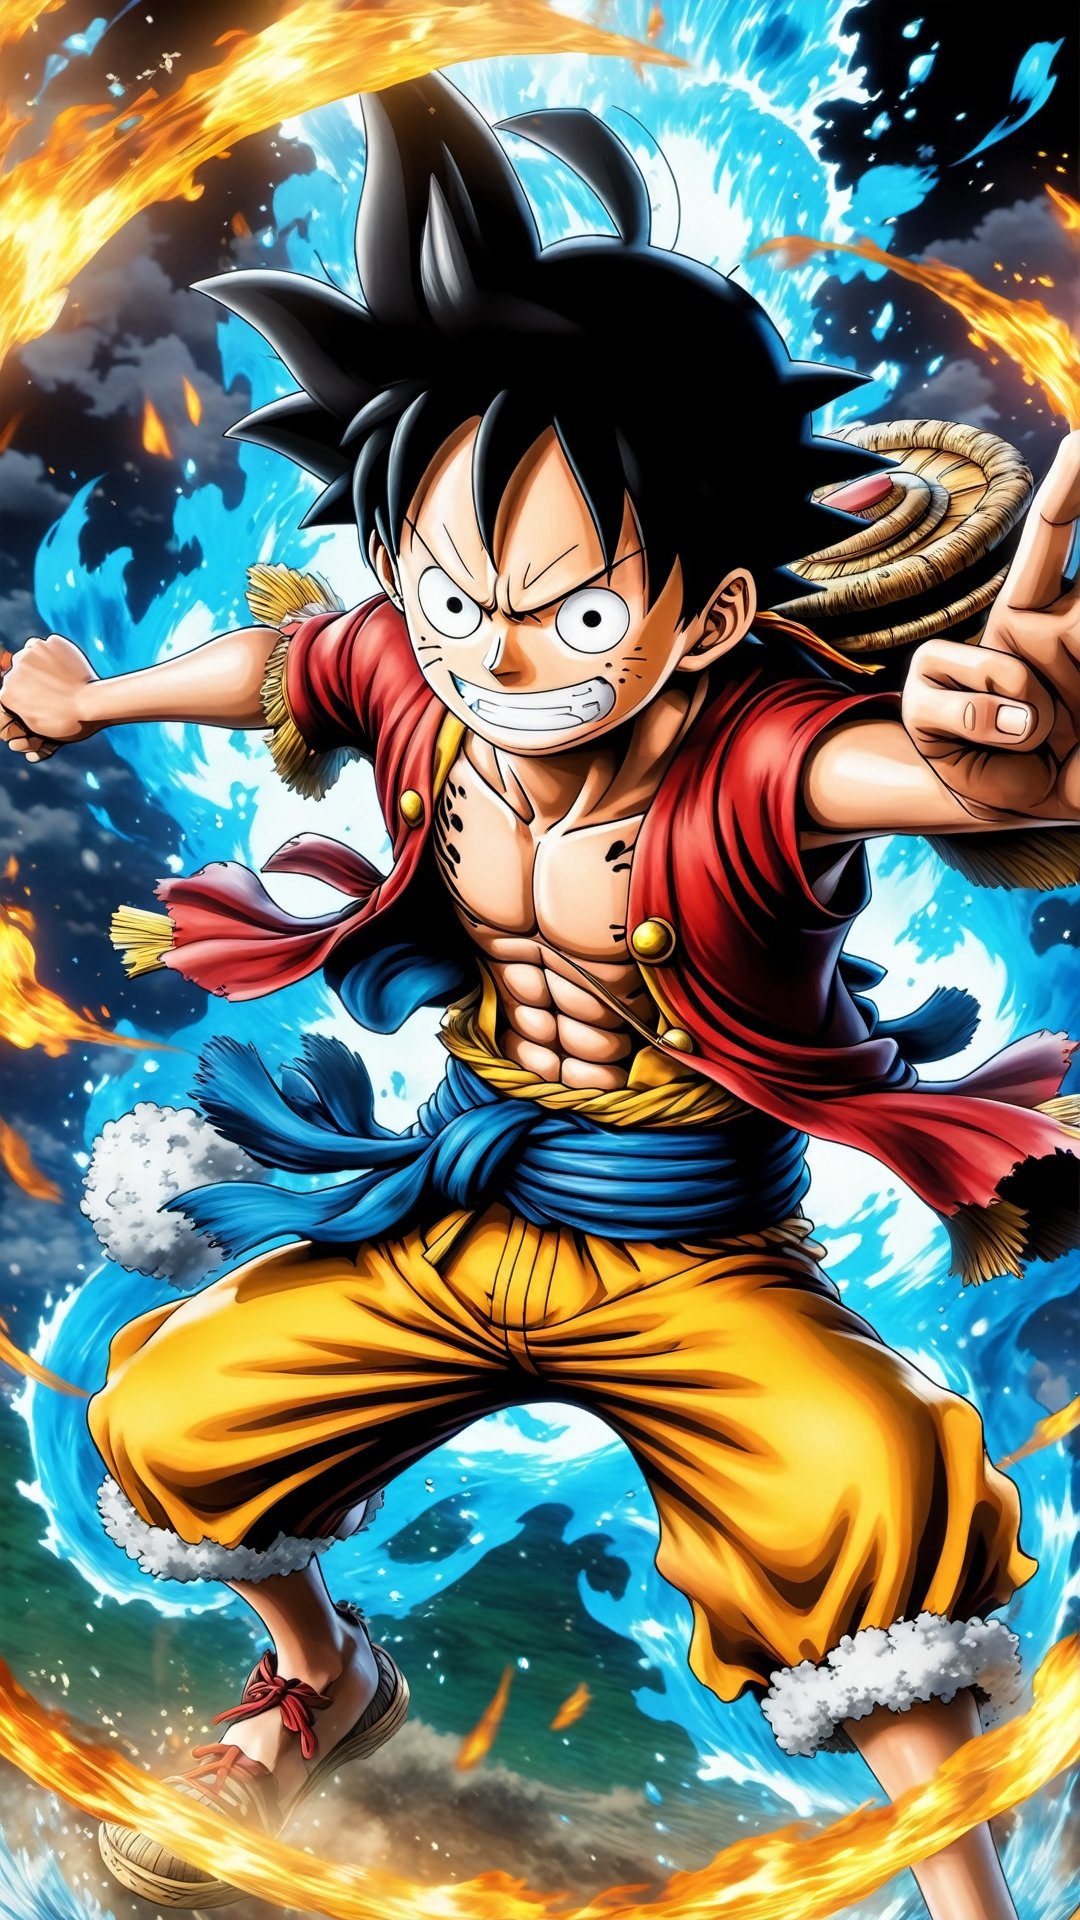 Design a stylized representation of Luffy in his ((Gear form)), infused with the elemental fury of nature. Surround him with a swirling maelstrom of energy, each element personified in the form of fire, water, earth, and air. Craft the artwork in a ((cinematic short)) format to accentuate the elemental chaos. Utilize a wide ((dynamic range)) to illuminate the vivid colors and intricate elemental details. Experiment with a ((dynamic viewing angle)) to emphasize Luffy's mastery over these forces. Render the image in an impressive ((8K)) resolution with a ((16-bit color)) palette, capturing the dynamic interplay of elements and Luffy's commanding presence.